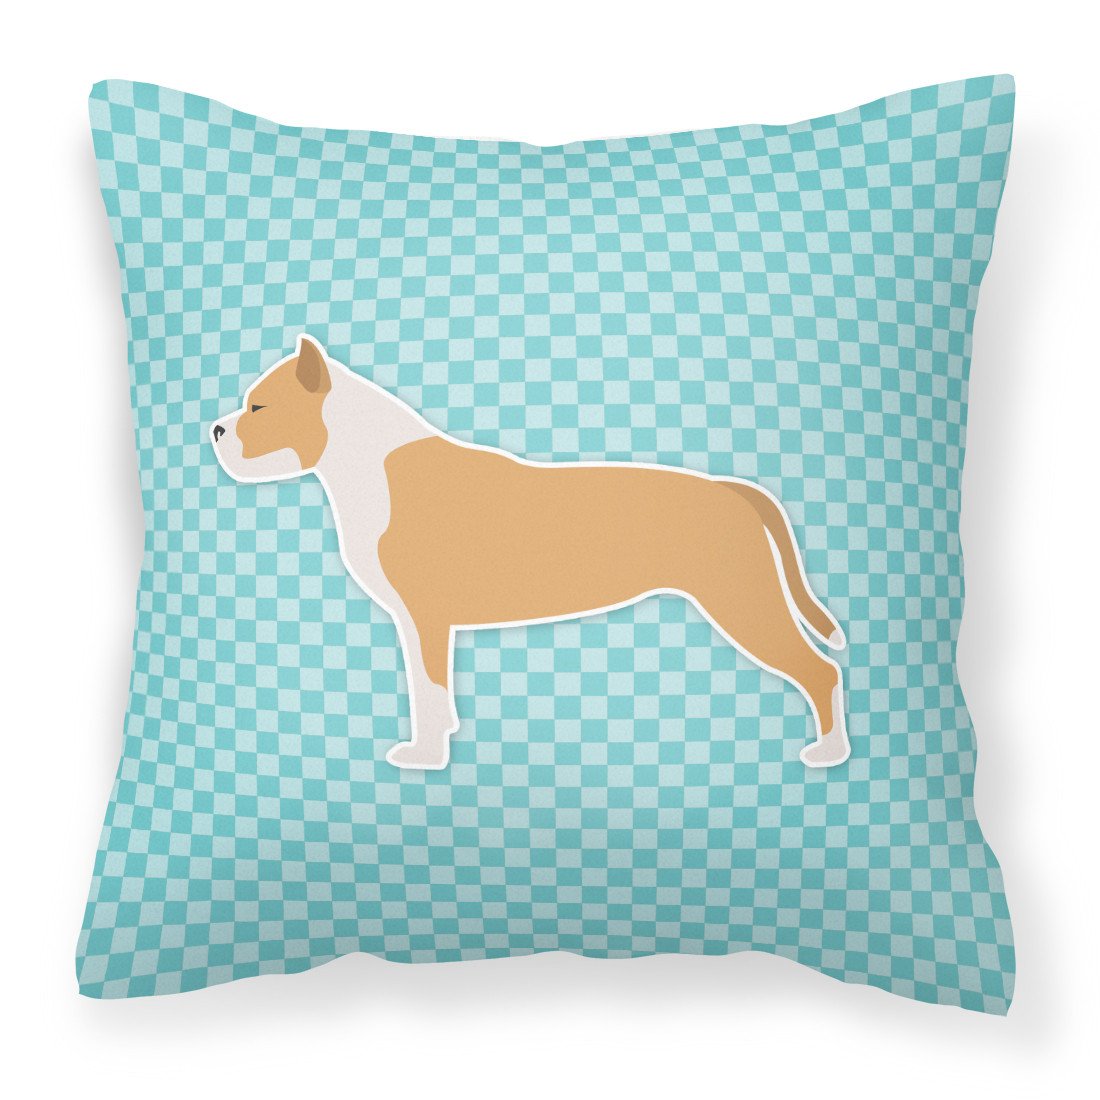 Staffordshire Bull Terrier Checkerboard Blue Fabric Decorative Pillow BB3754PW1818 by Caroline's Treasures